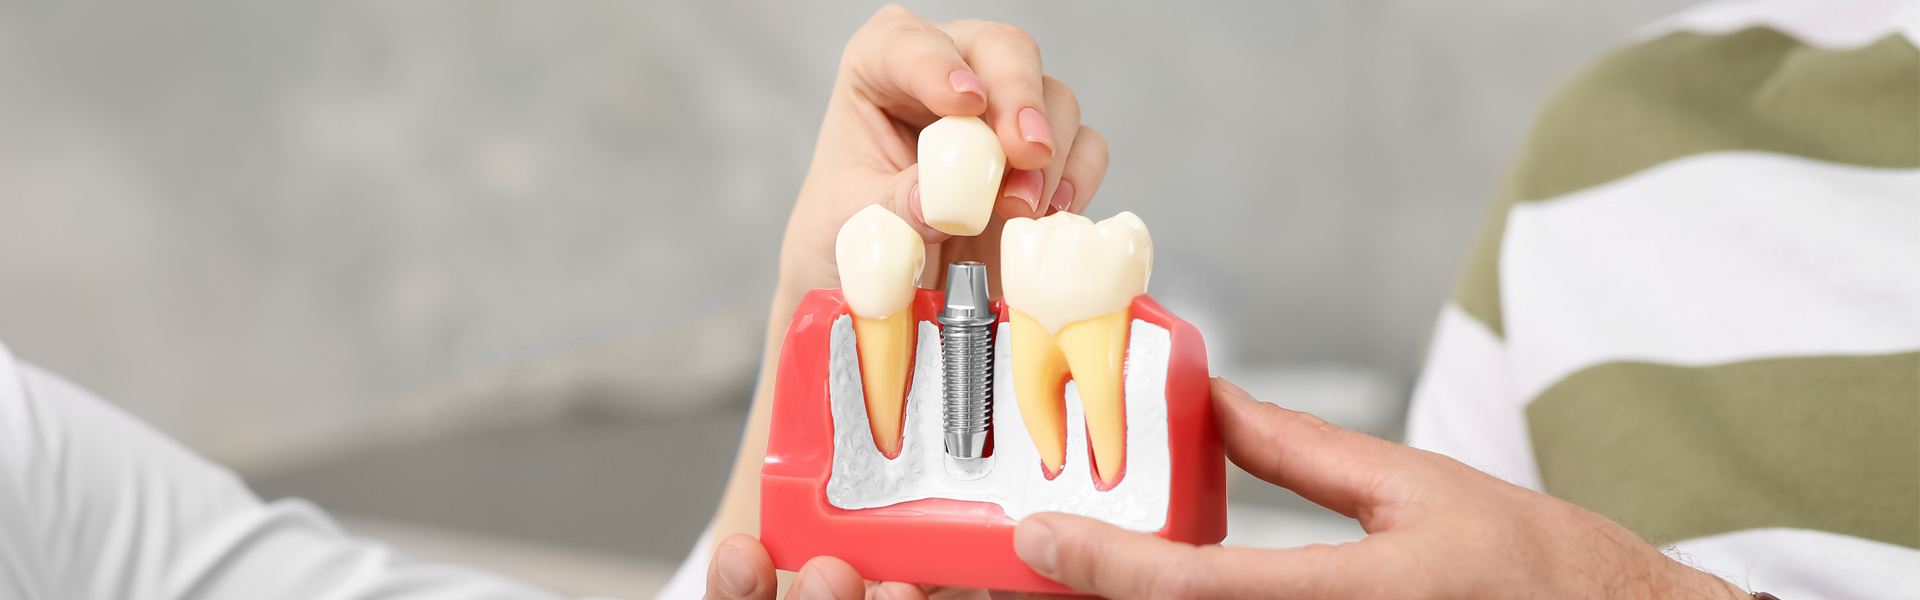 Biting the Bullet: Dealing with Dental Implant Pain When Chewing